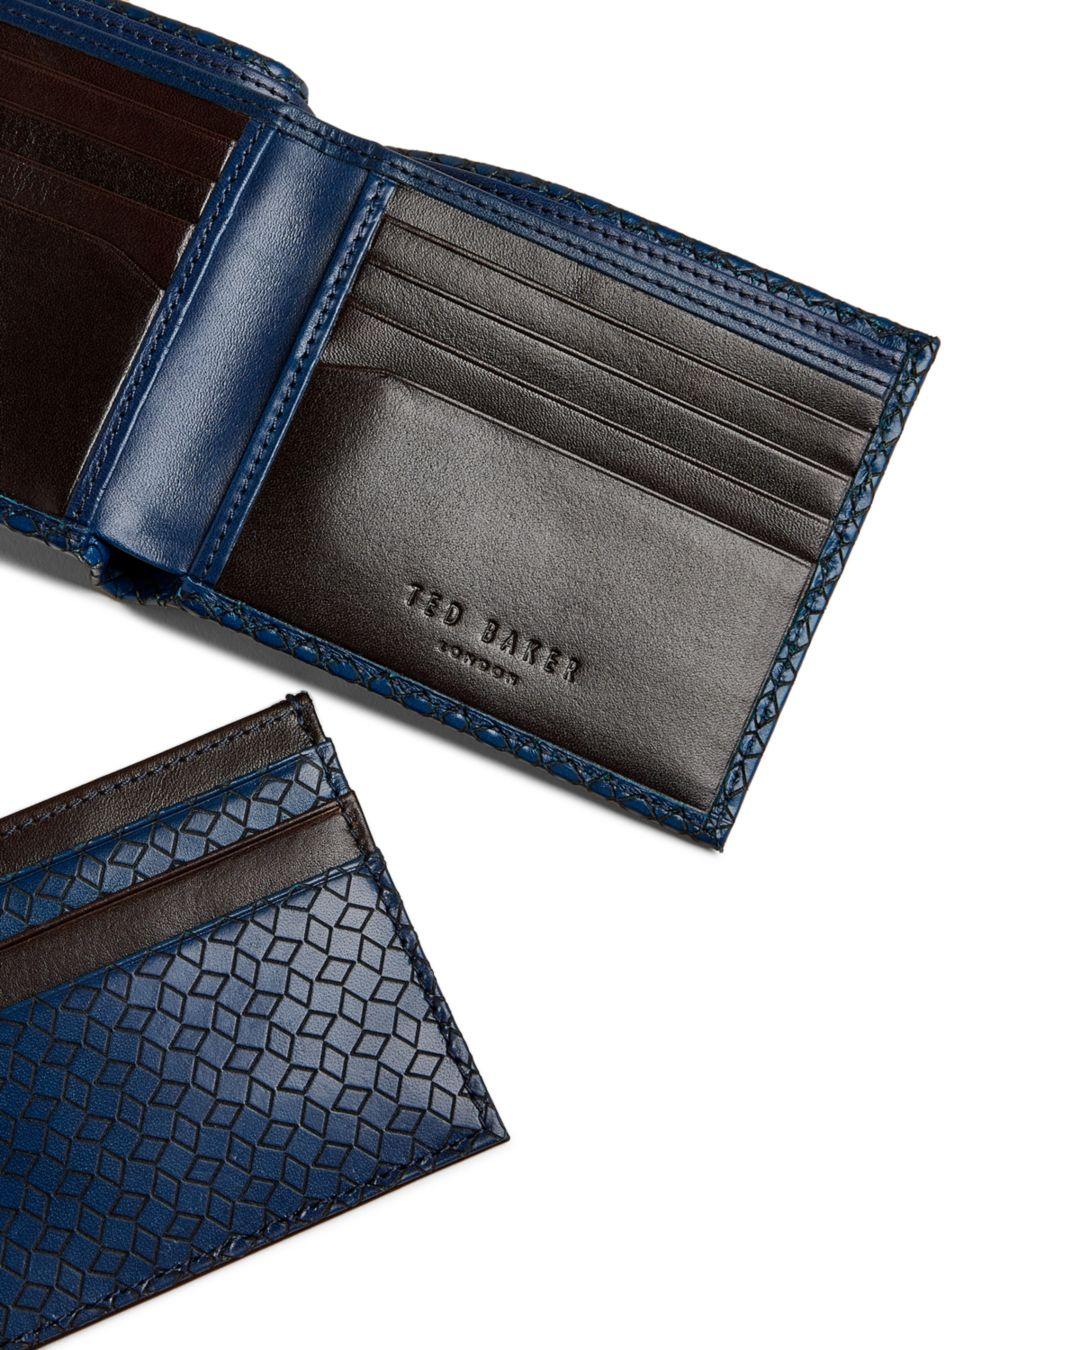 Ted Baker Leather Wallet And Cardholder Gift Set in Navy (Blue) for 